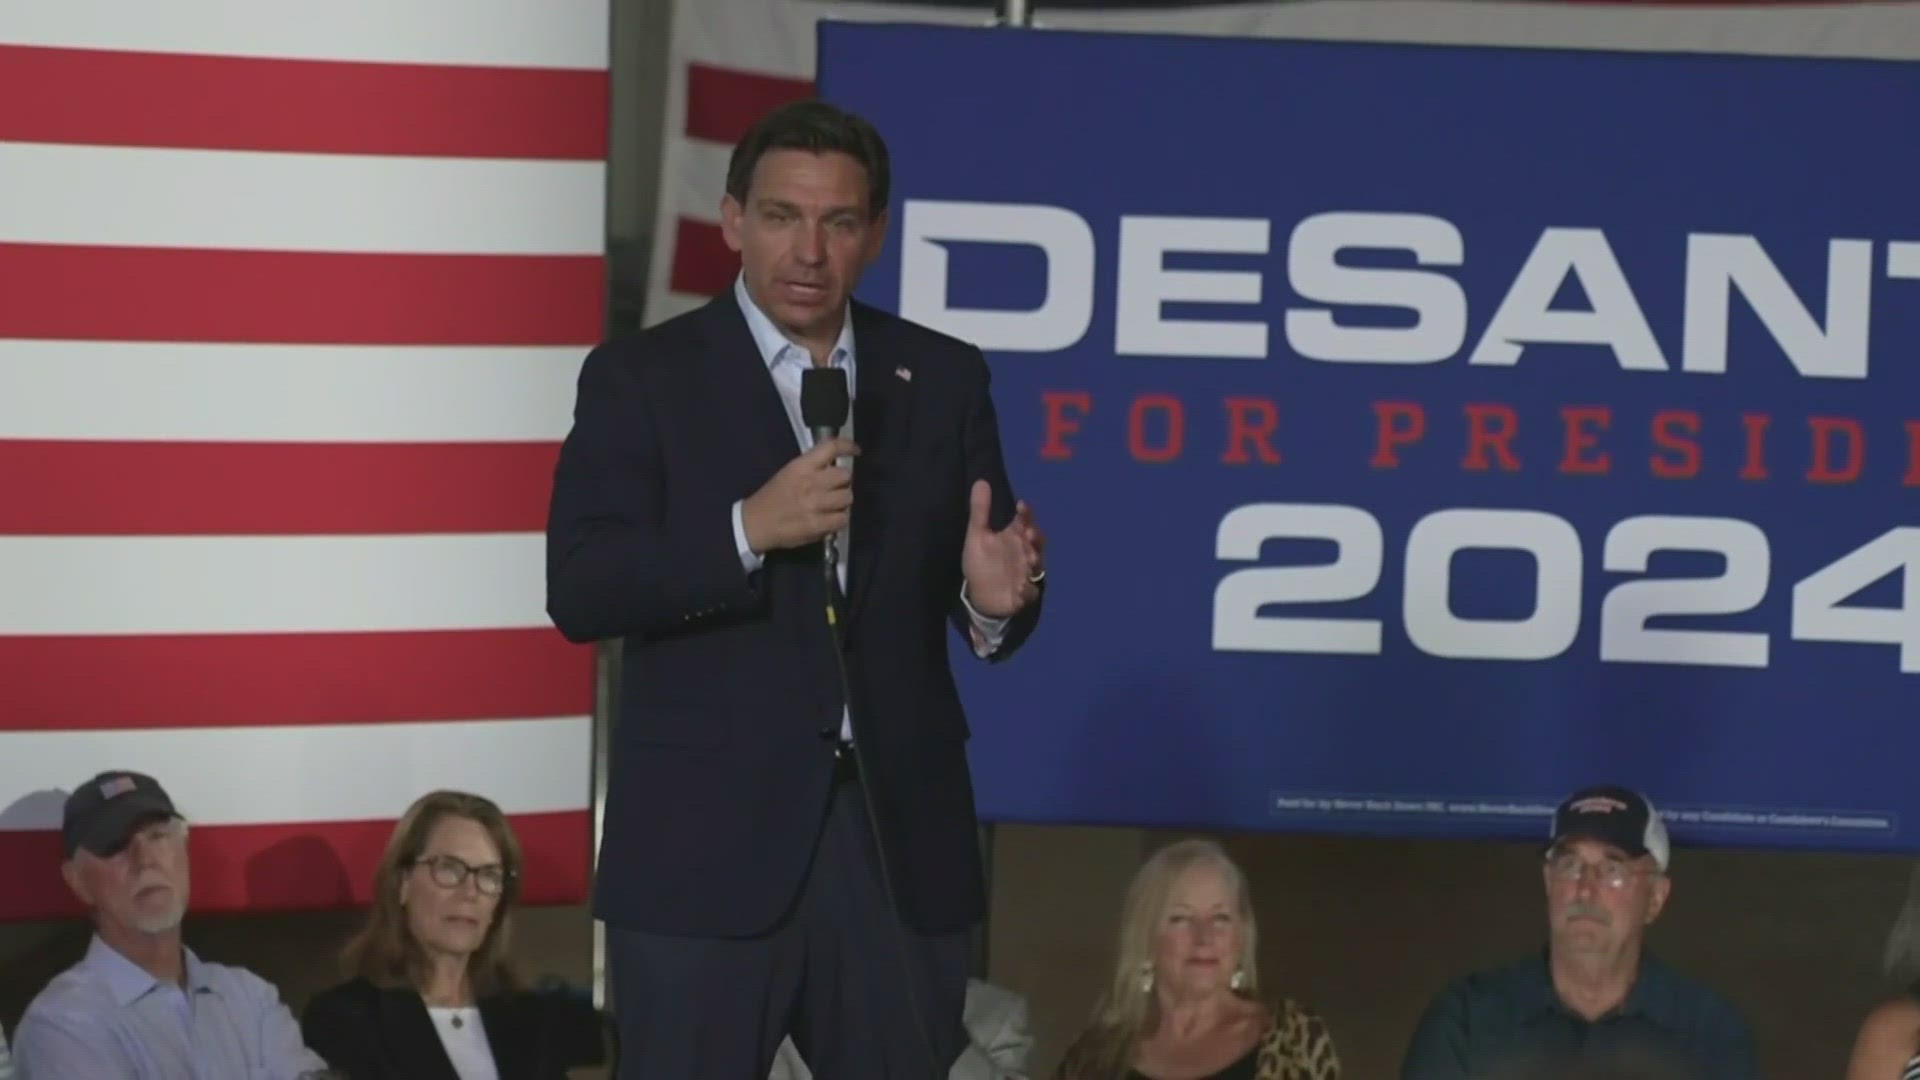 Former President Donald Trump will not be at the debate in Milwaukee, making Florida Governor Ron DeSantis a candidate seen as a frontrunner on stage.